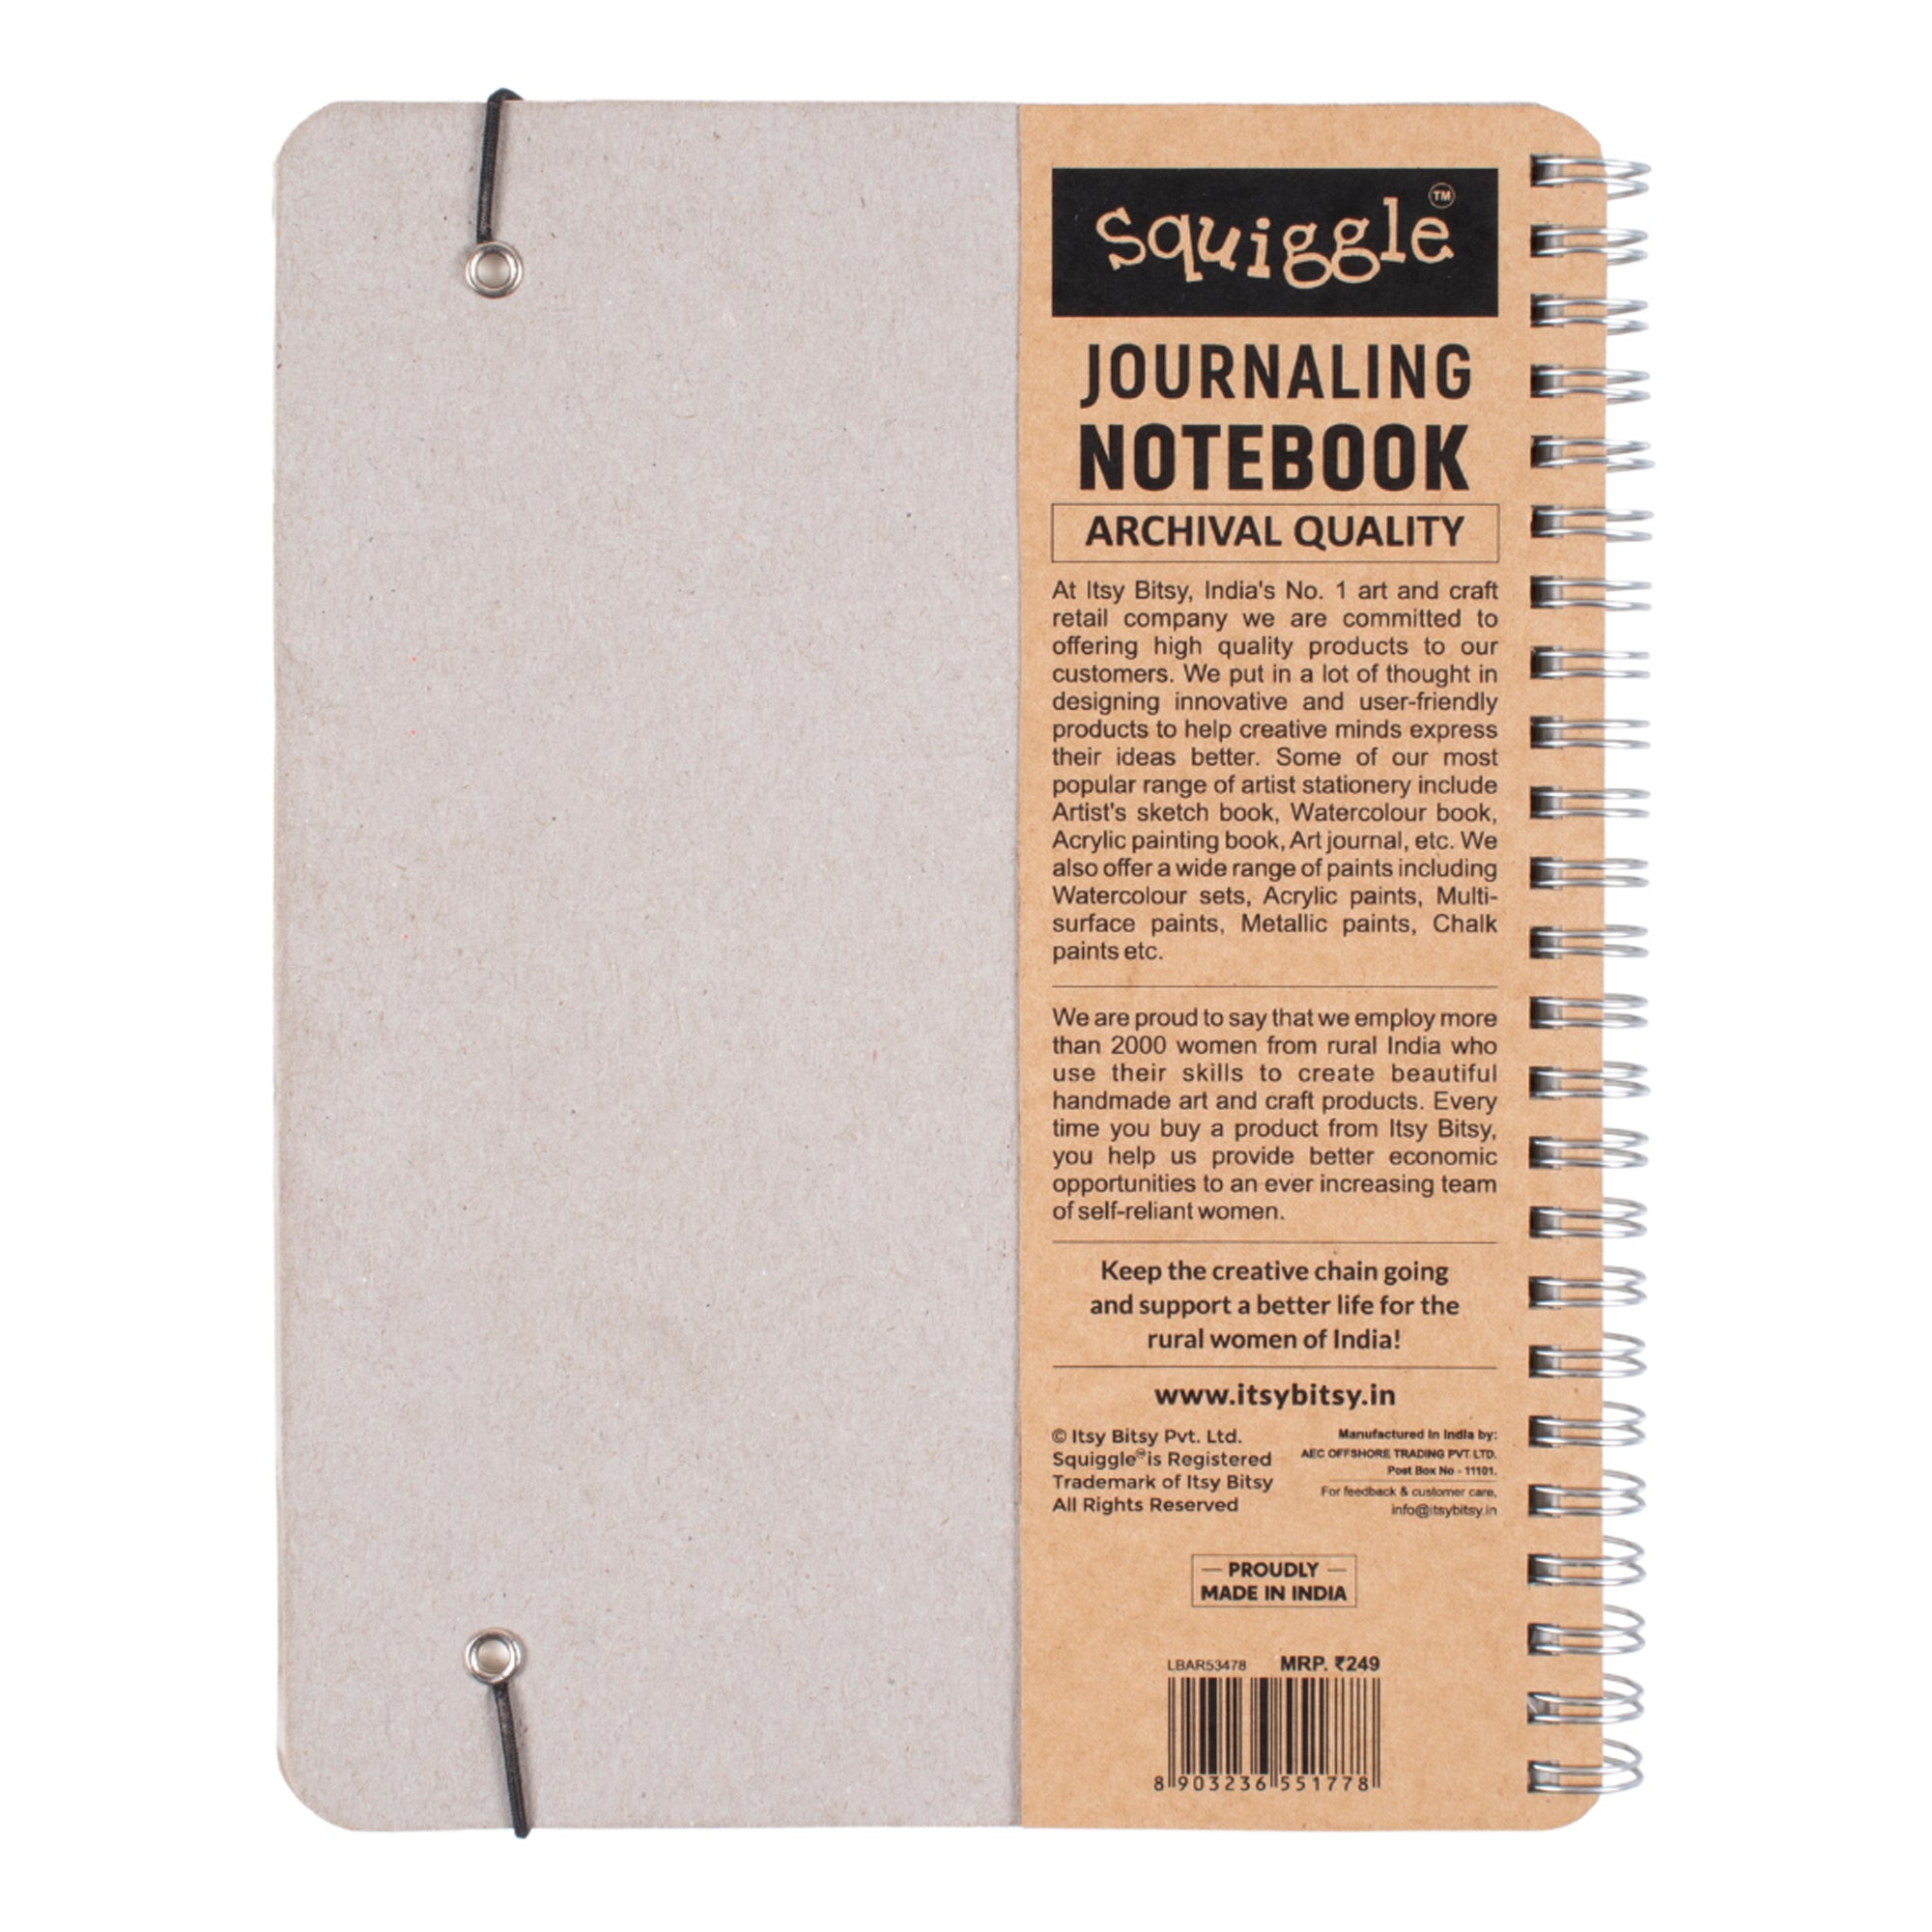 Journaling Notebook Premium Quality A5 Ruled 90Gsm Wiro Squiggle 144Pages Lb